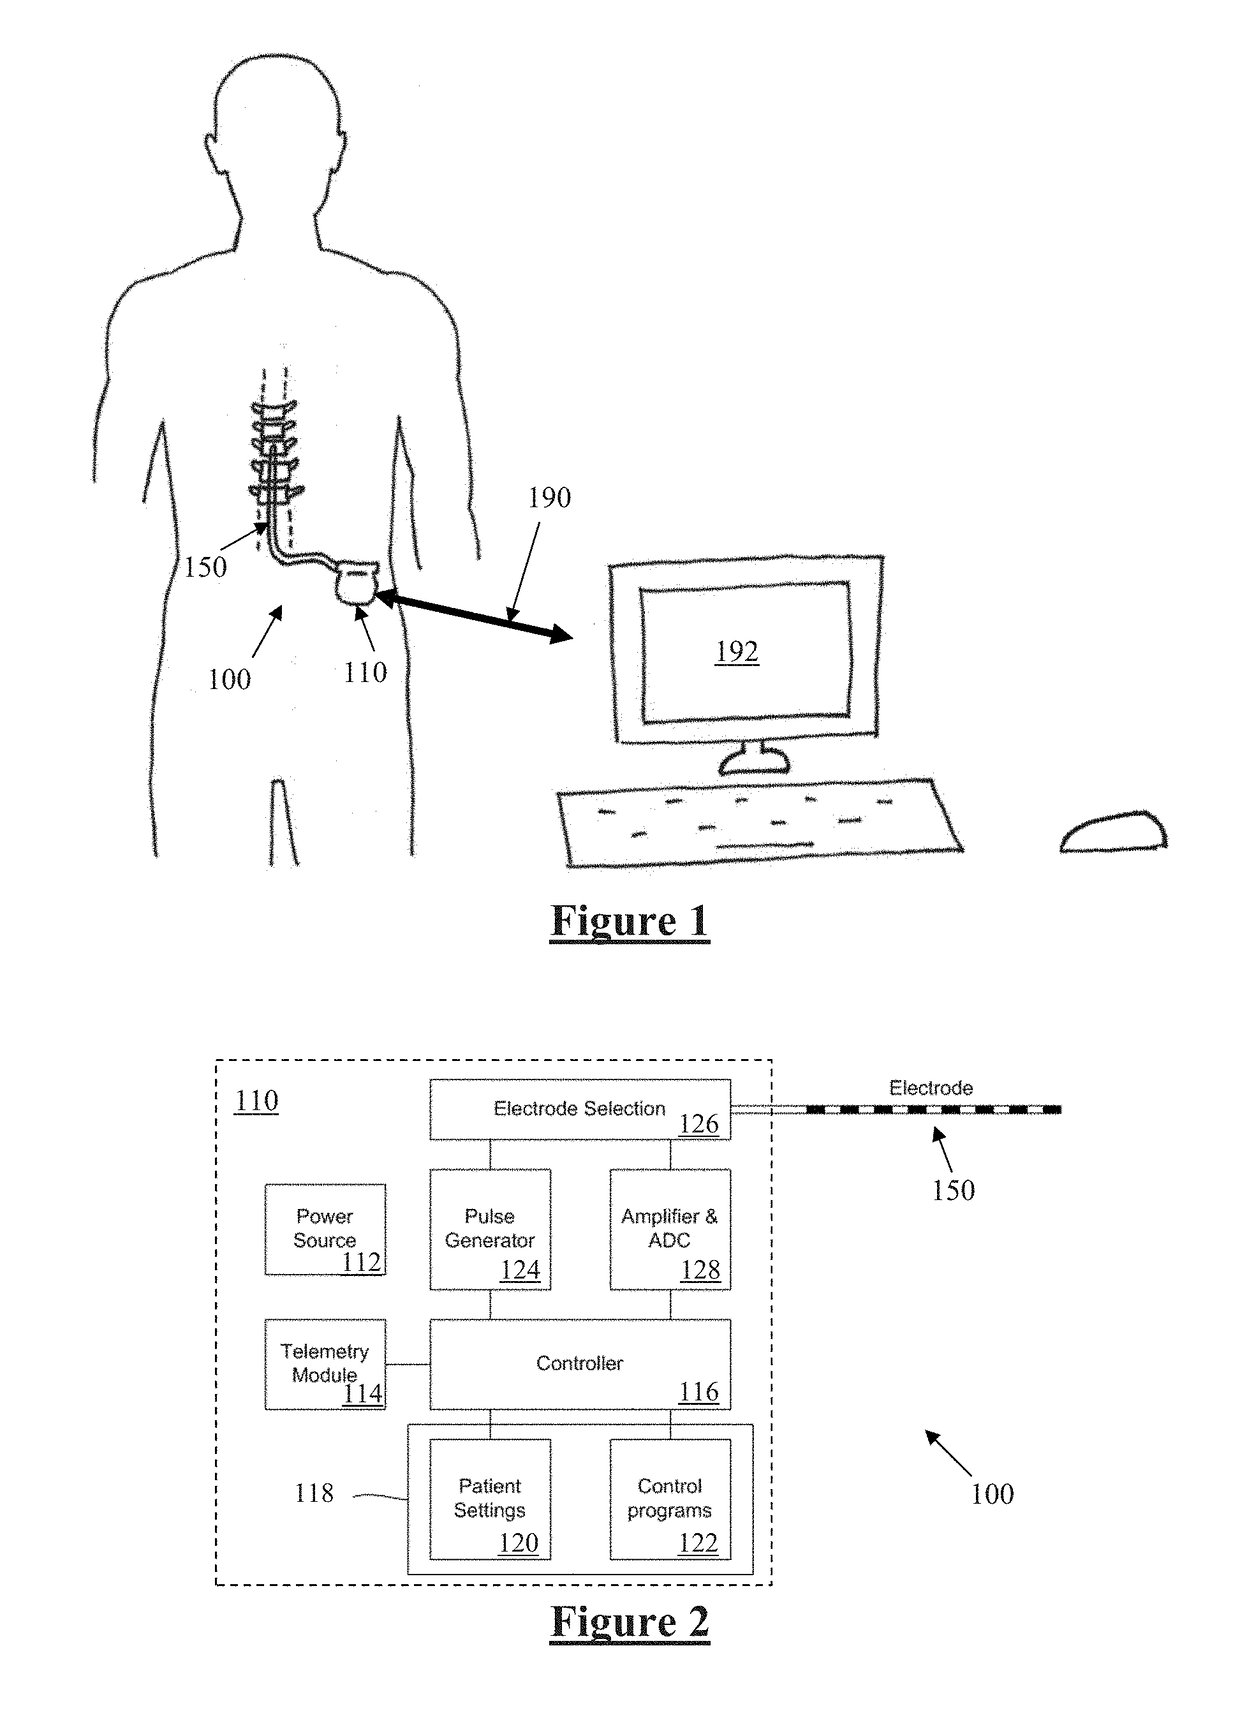 Method and Device for Neural Implant Communication